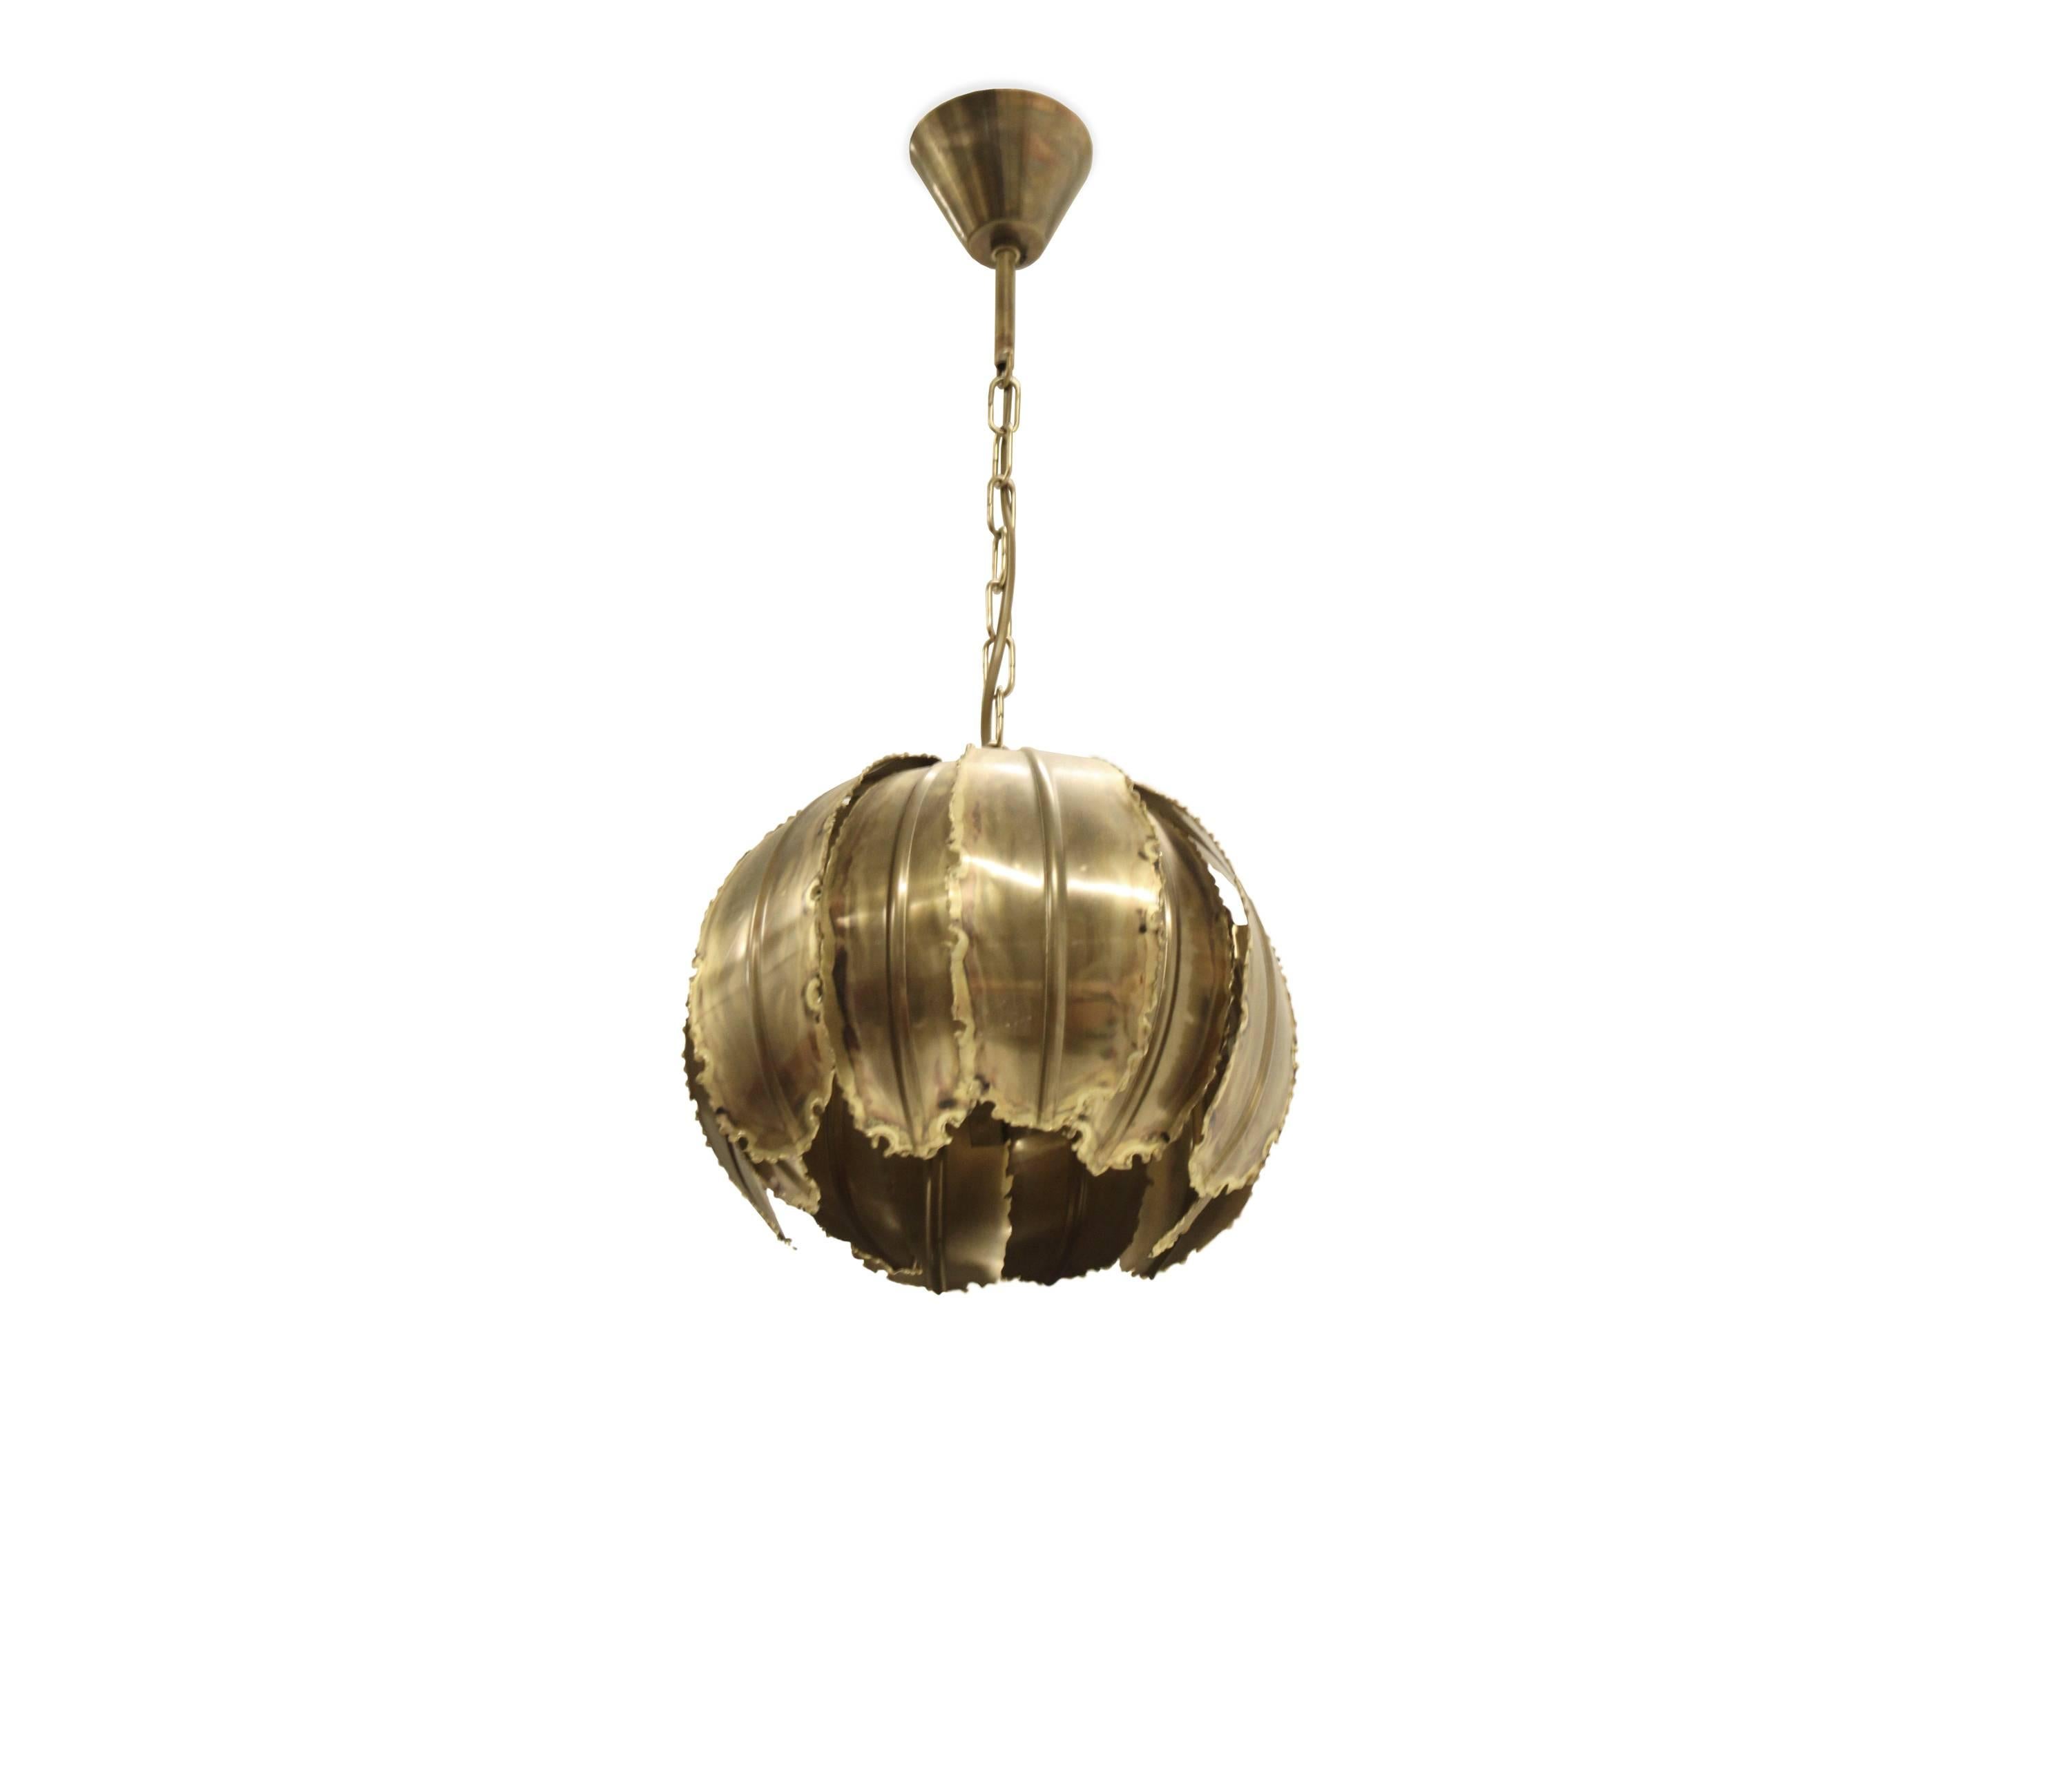 Danish Ceiling Pendant 'Poppy' by Svend Aage Holm Sorensen, 1970s For Sale